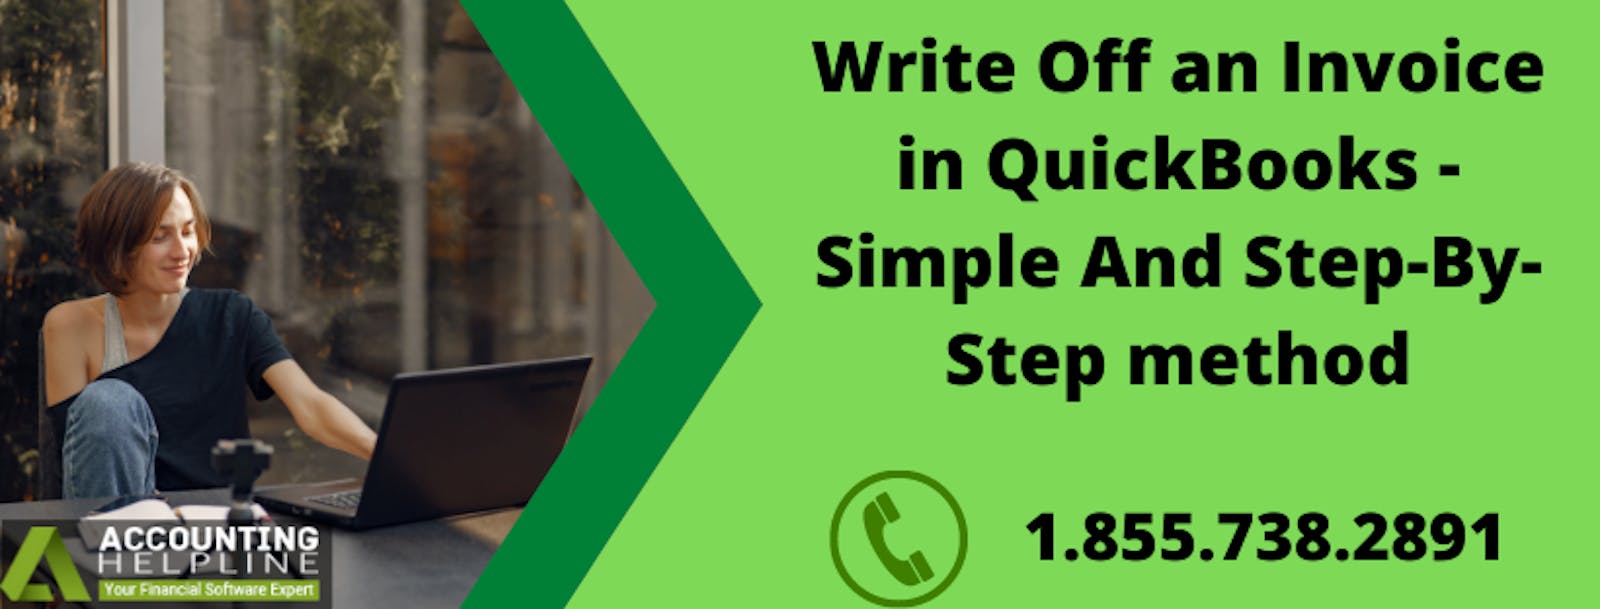 Write Off an Invoice in QuickBooks - Simple And Step-By-Step method